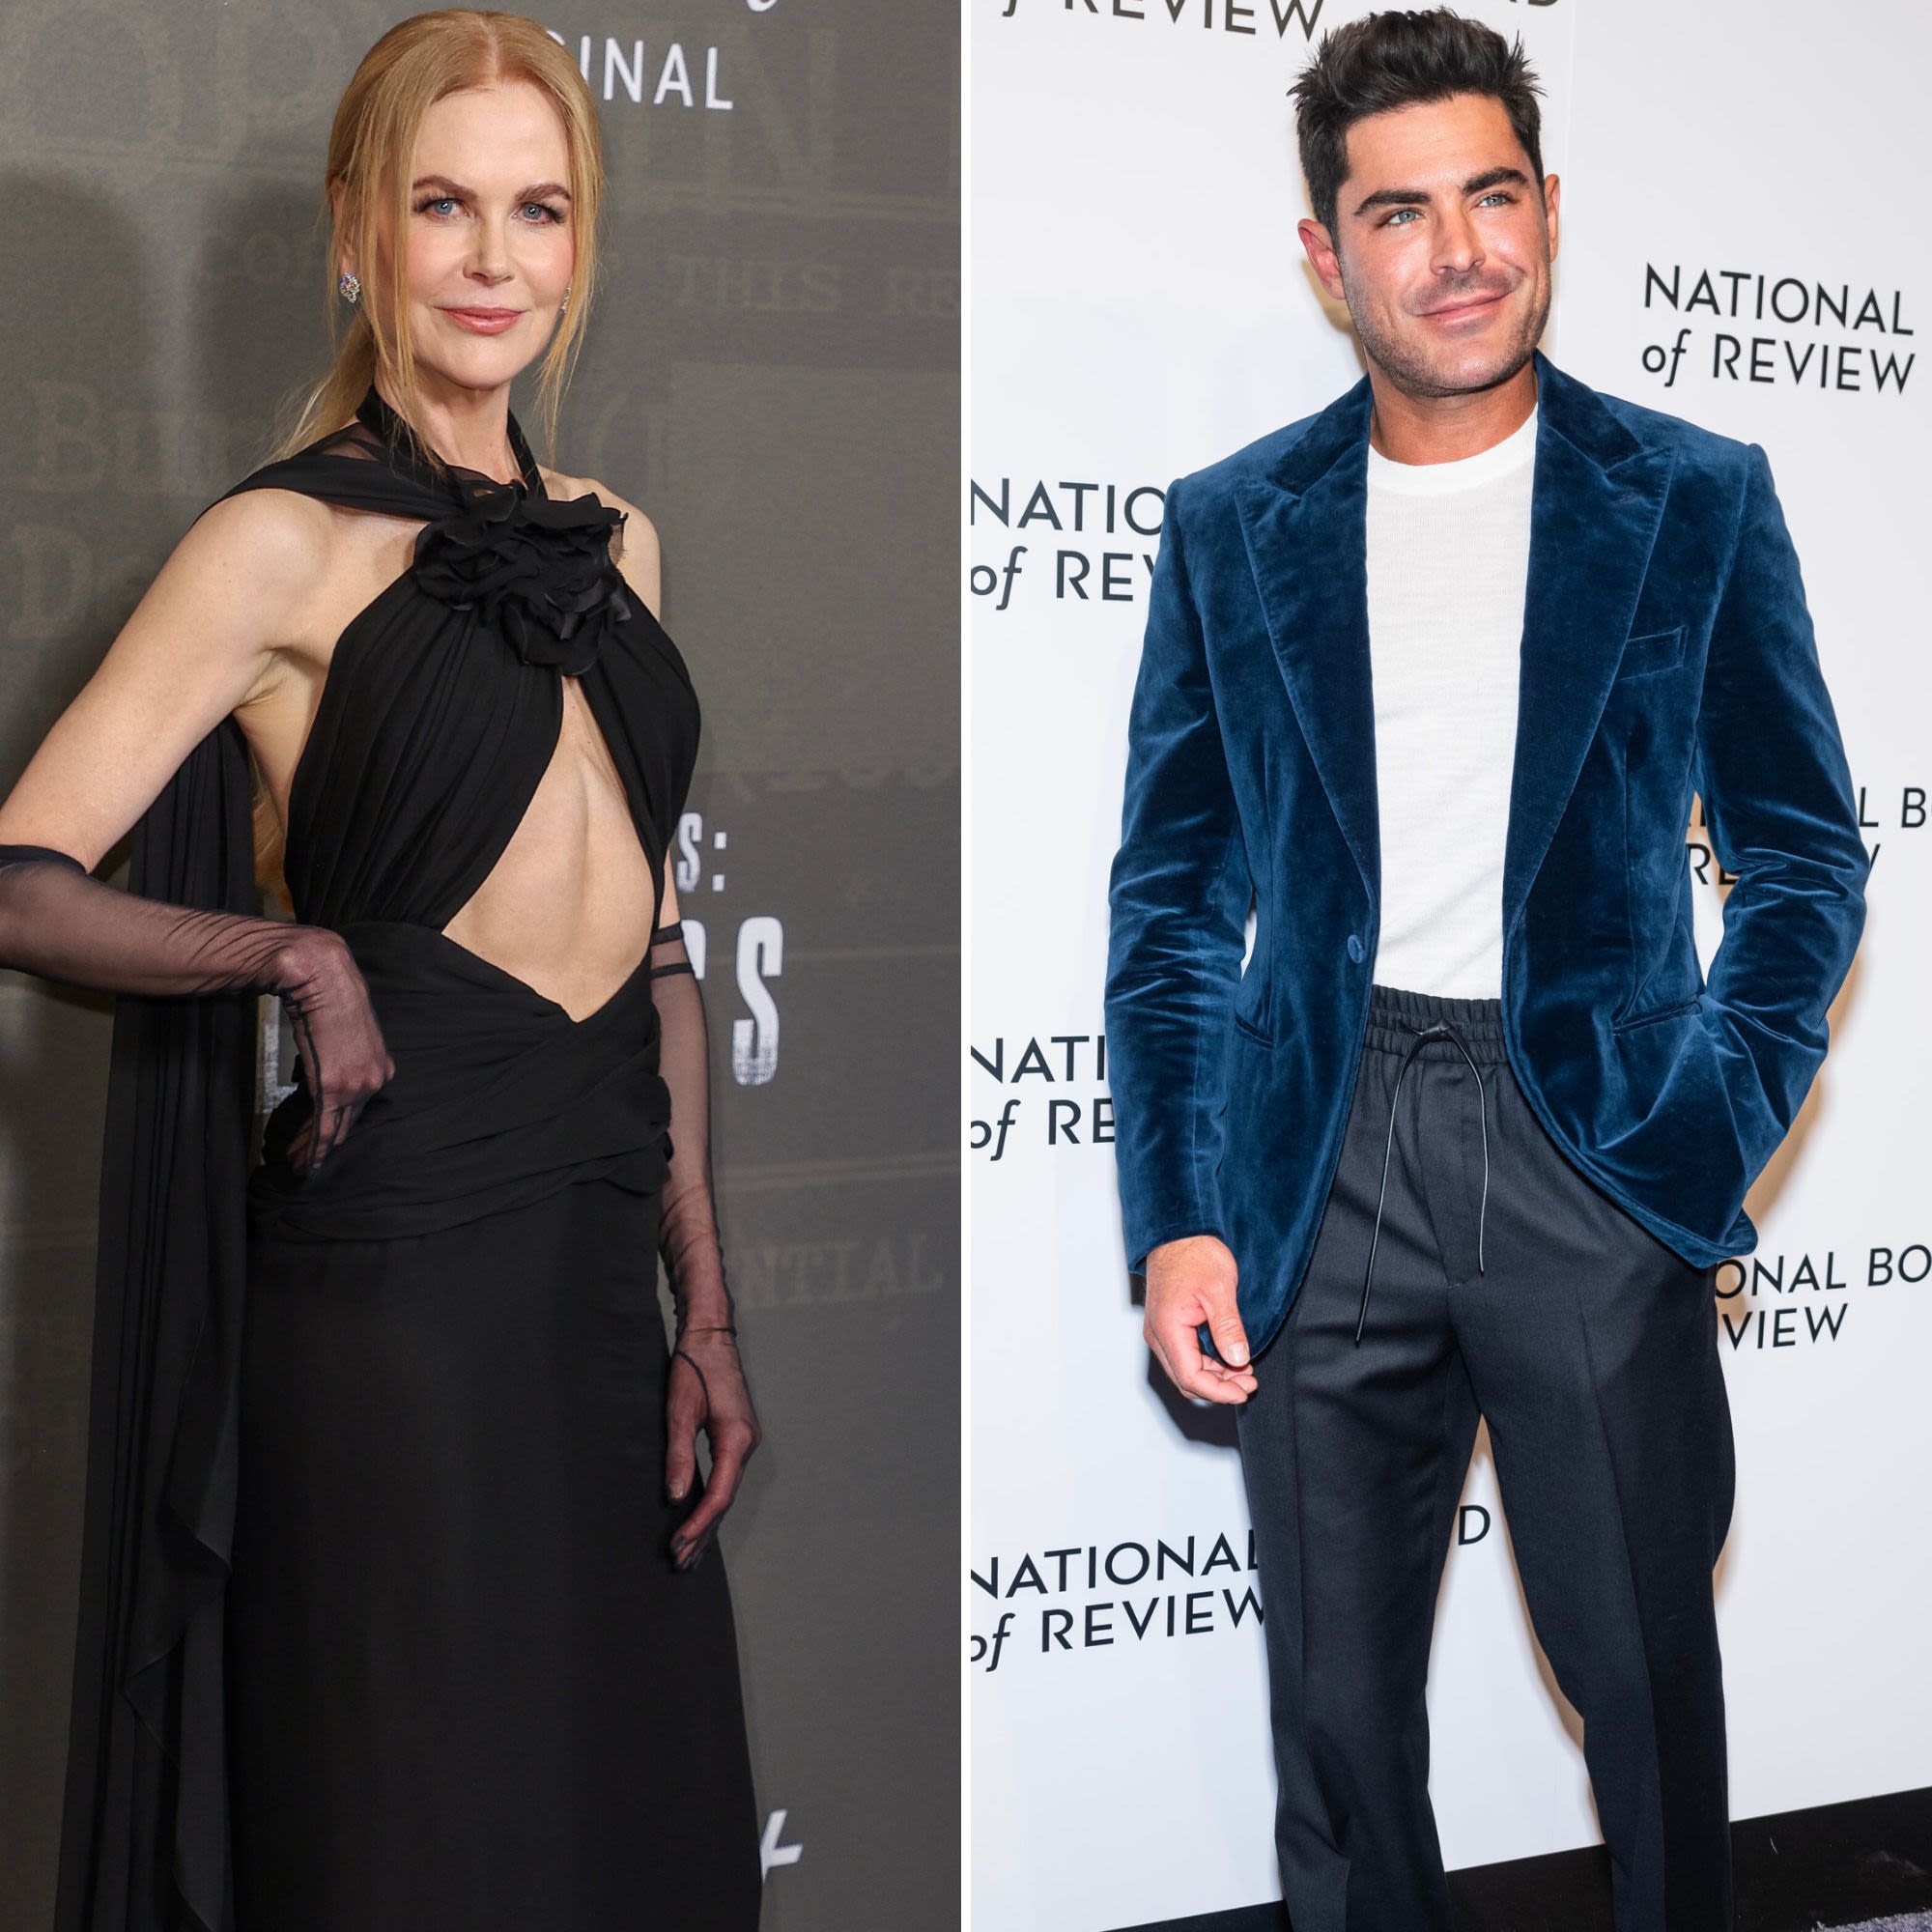 Nicole Kidman Appears in Steamy Trailer With Zac Efron After Comment About Making Out With Costars